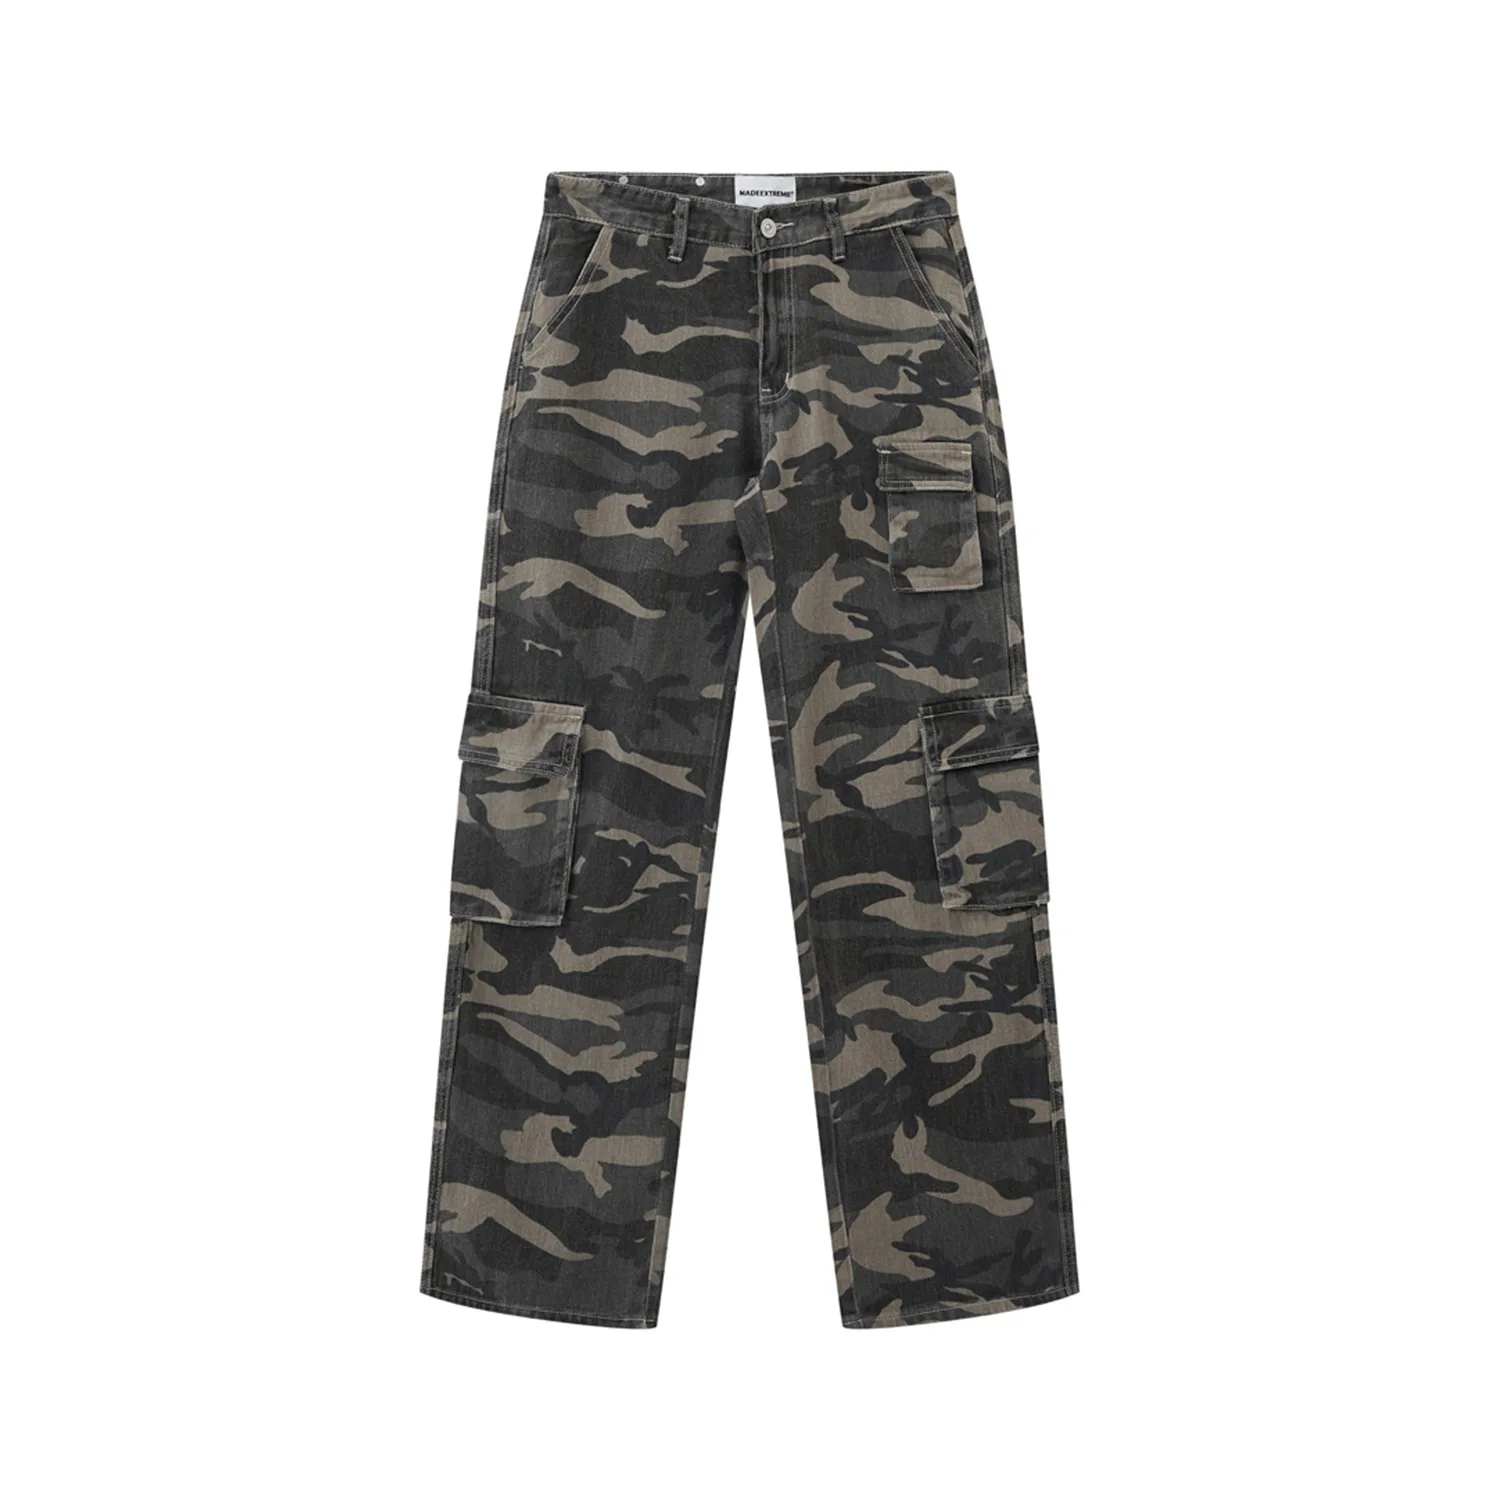 

MADEEXTREME Loose fitting camouflage casual pants Safari Style streetwear cargo pants